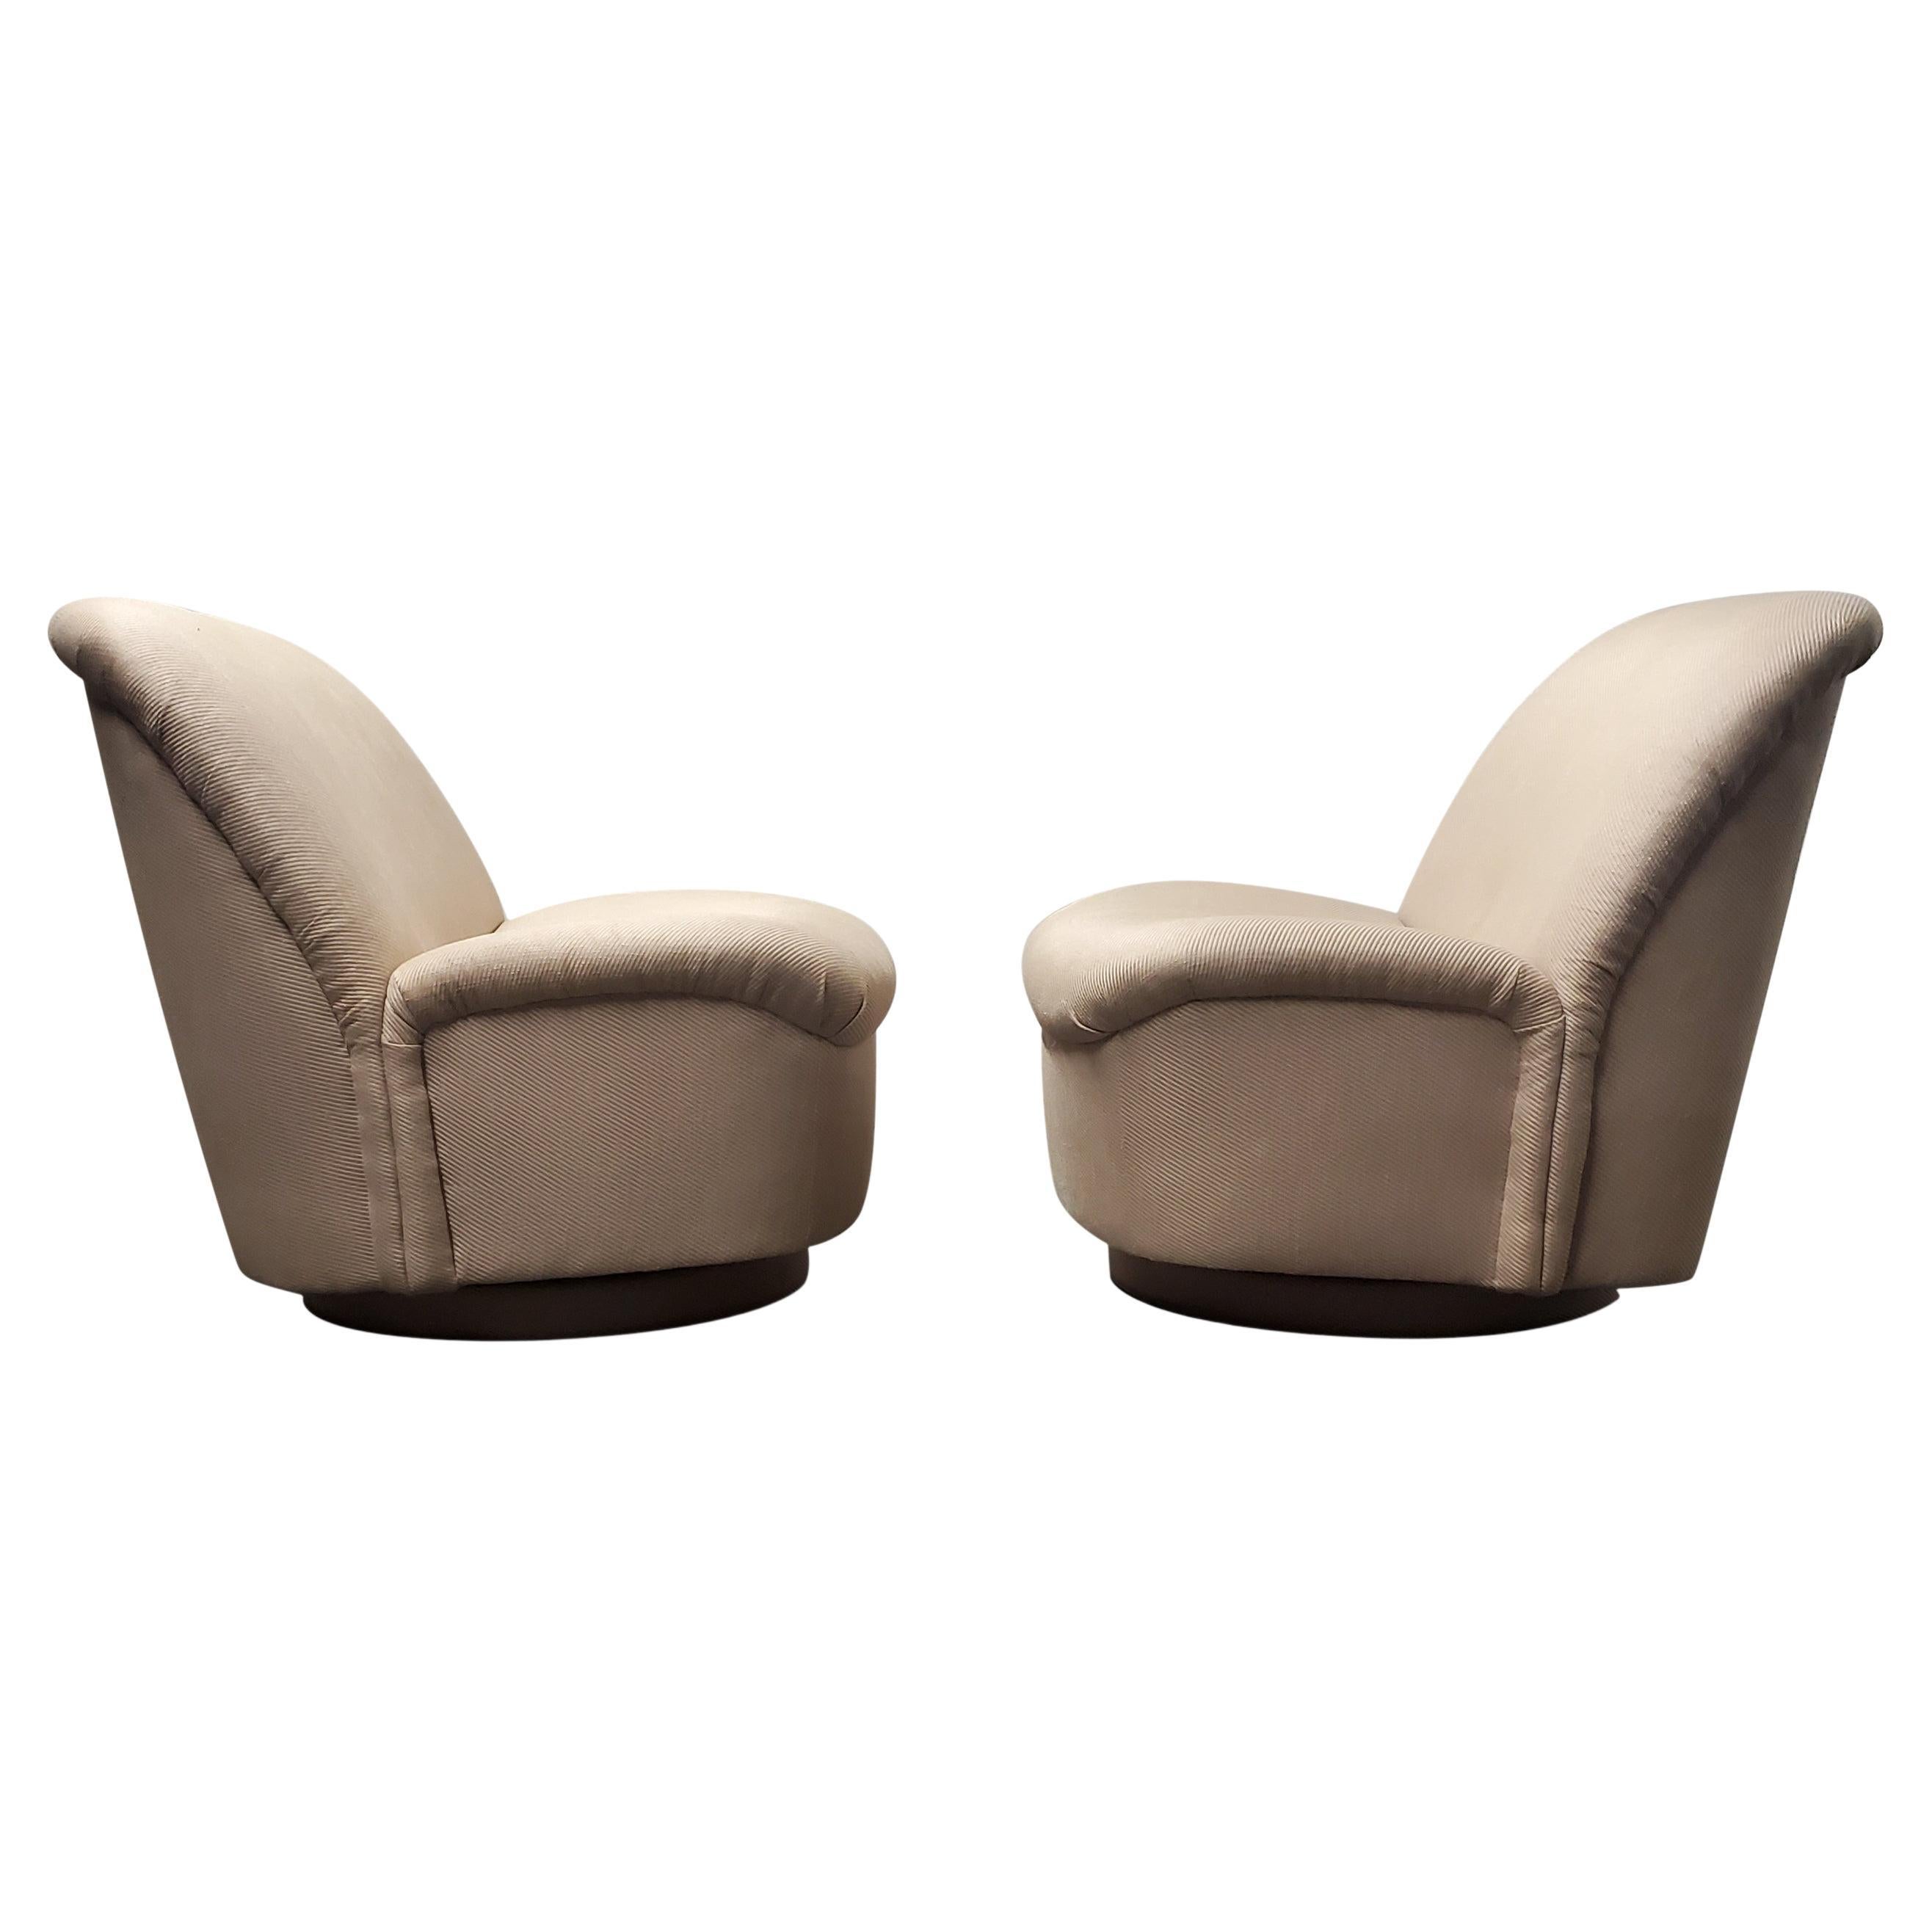 Pair of Signed Directional Swivel / Tilt Lounge Chairs